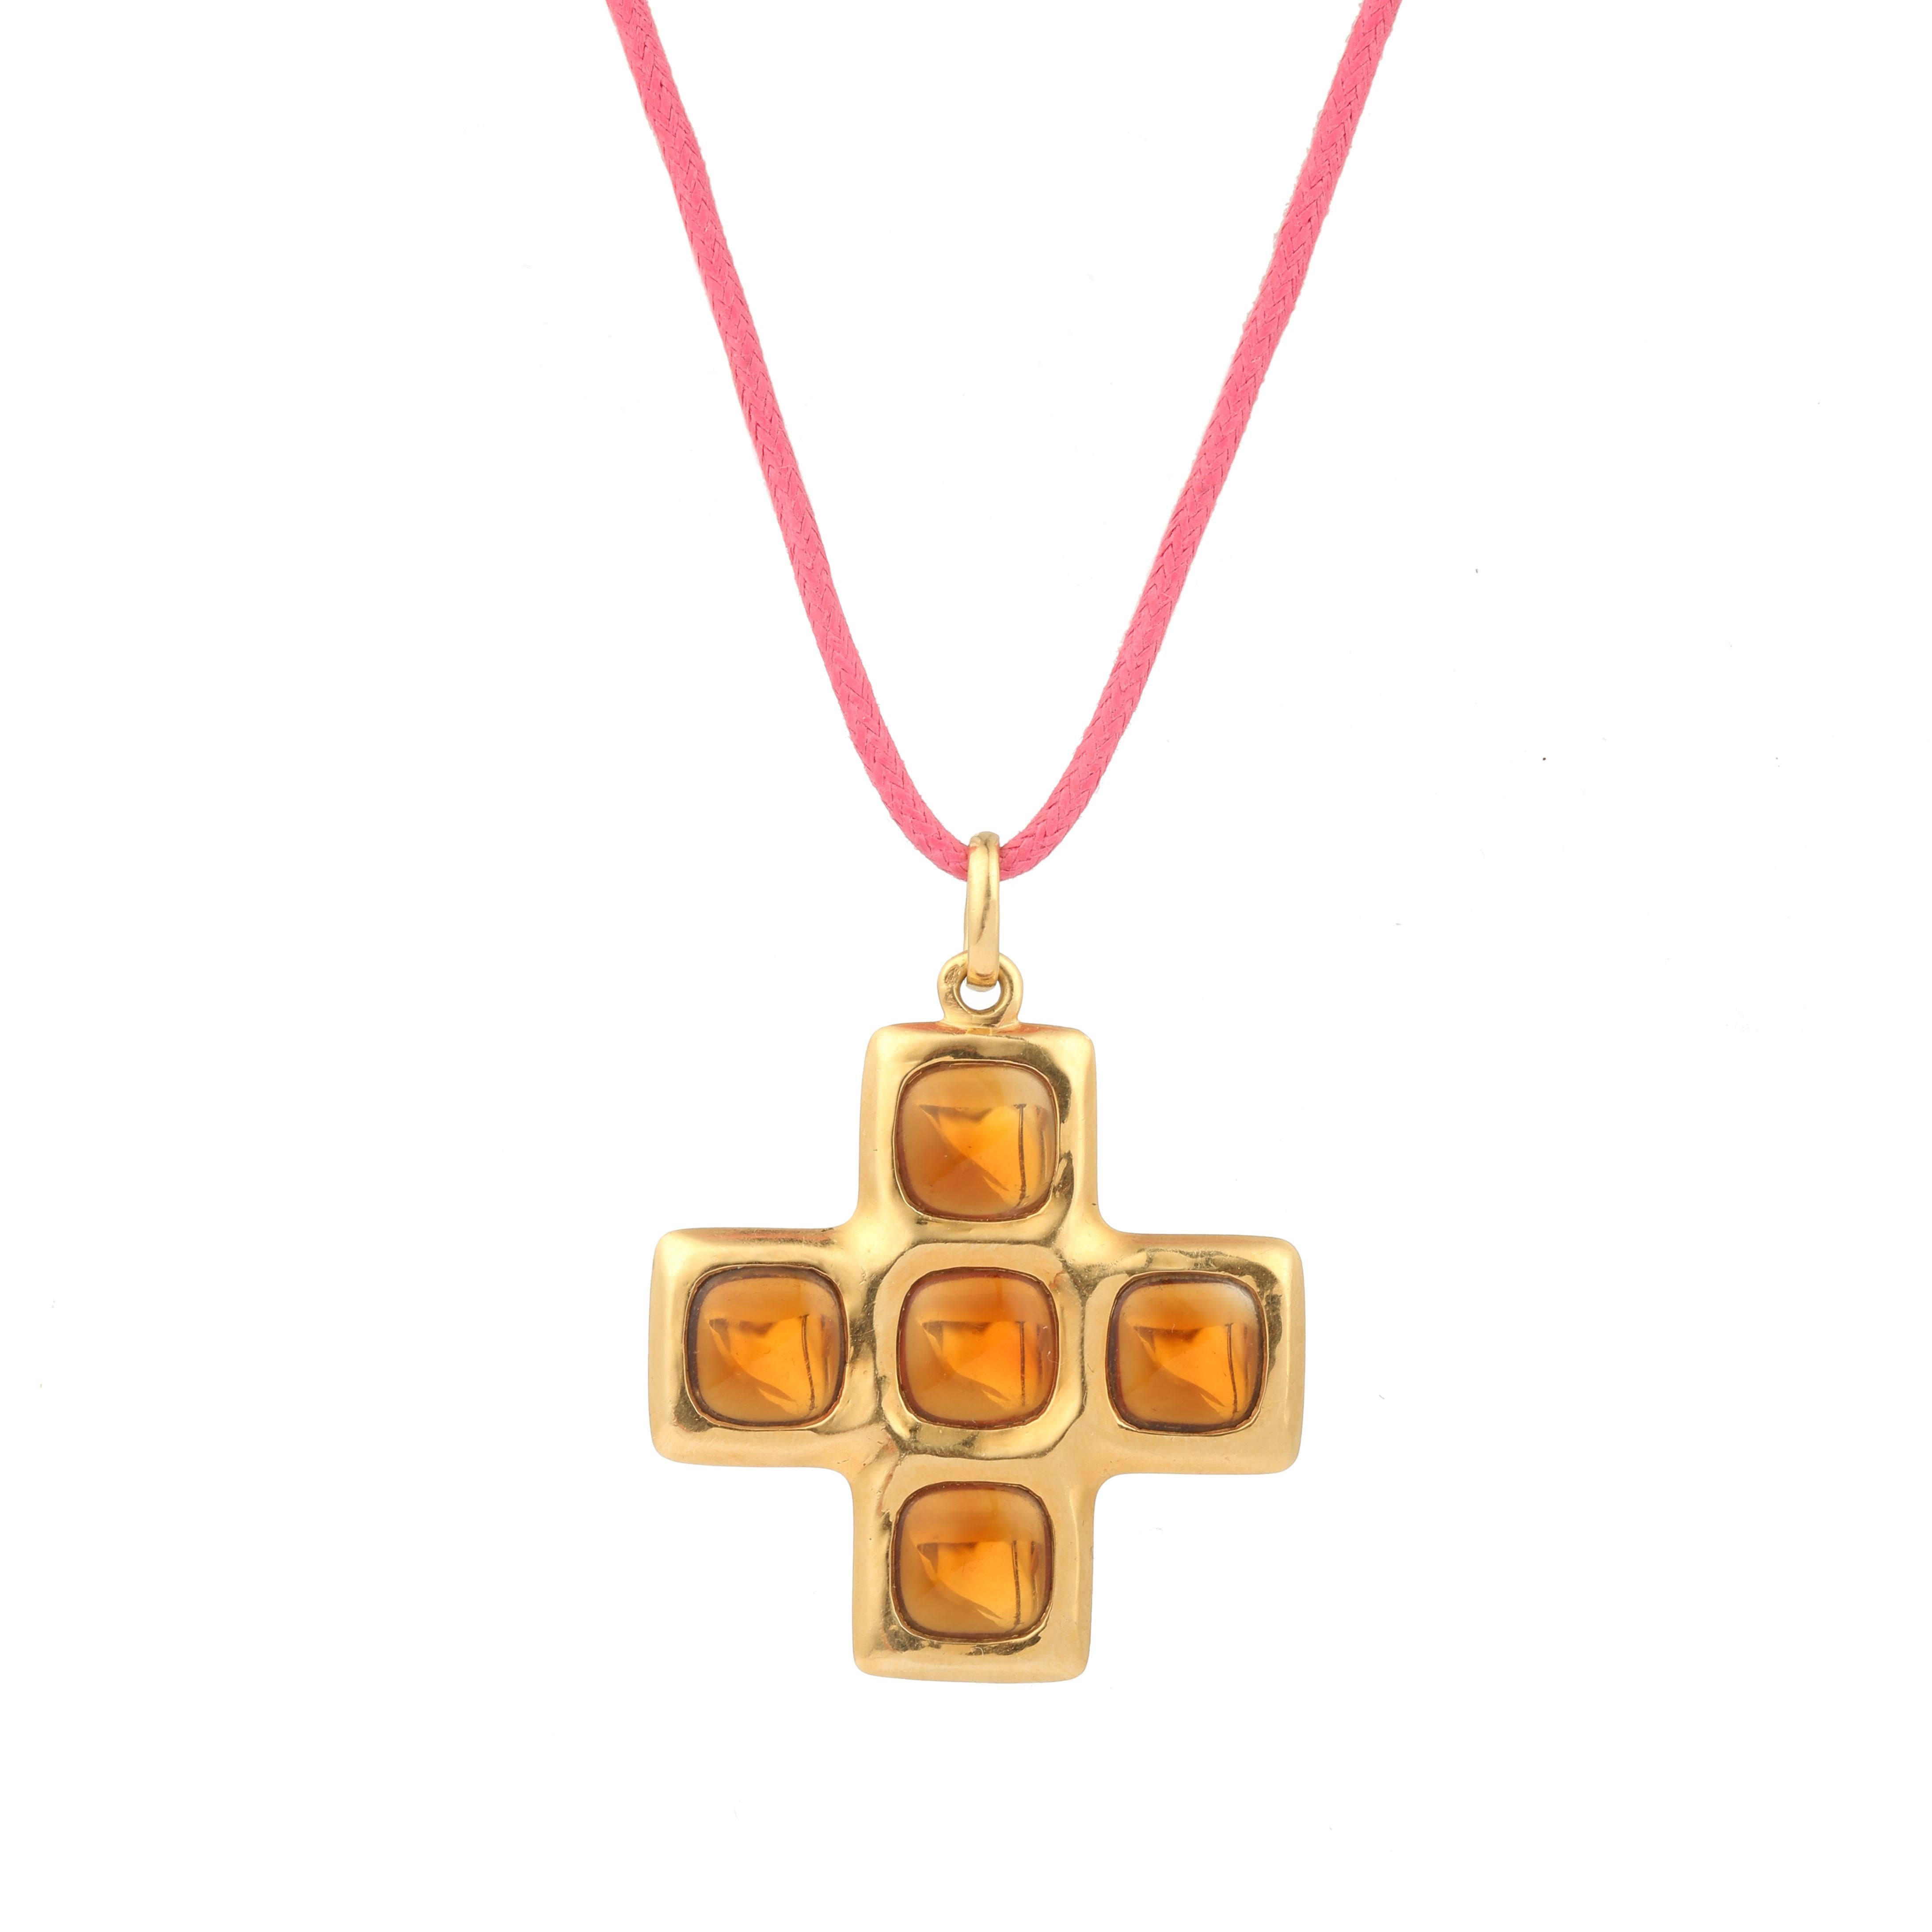 Pendant signed Pomellato featuring a cross with 4 branches of equal length and set with 5 citrine cabochons.

Total estimated citrine weight: 15 carats

Dimensions: 41 x 41 x 4.74 mm (1.614 x 1.614 x 1.686 inches)

Pendant weight: 24.5 g

18-carat